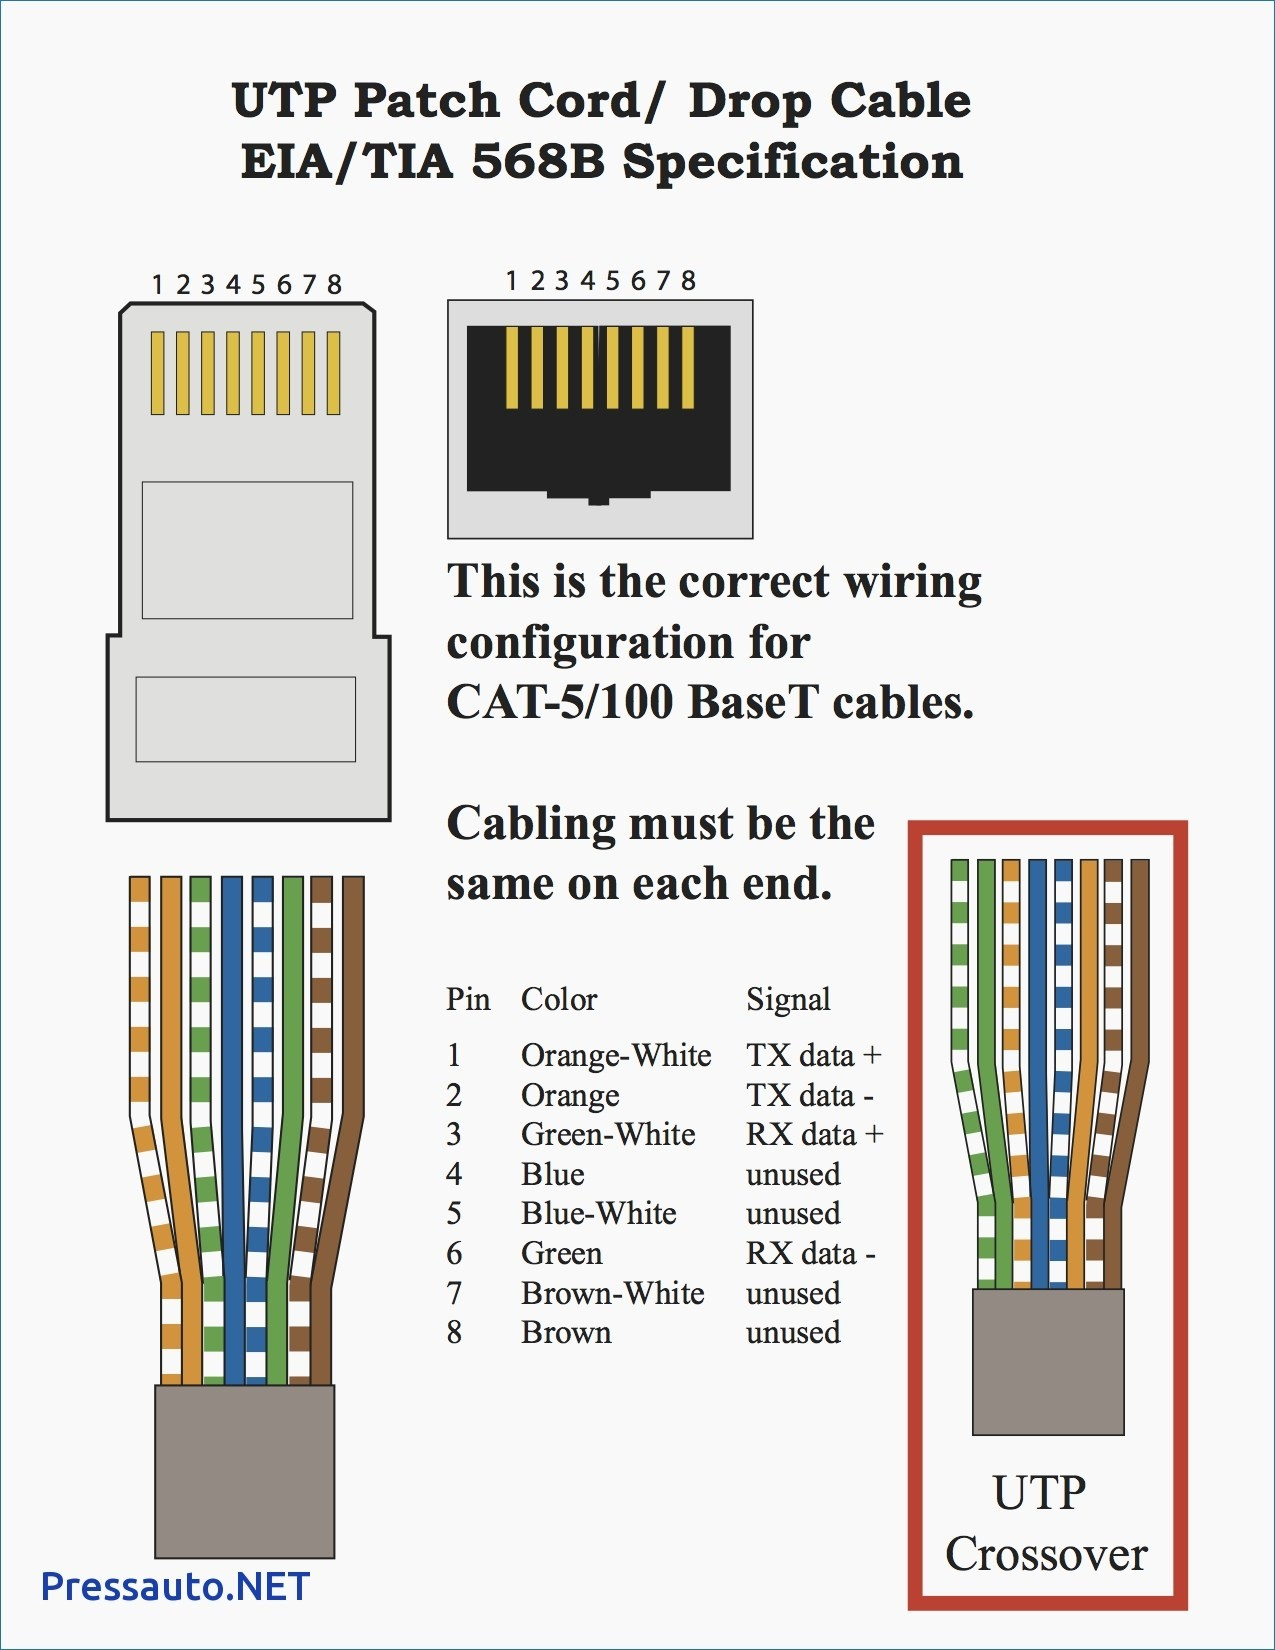 Wiring Diagram For A Cat5 Cable Valid Ieee 568B At Rj45 568B At Ieee - 568 B Wiring Diagram